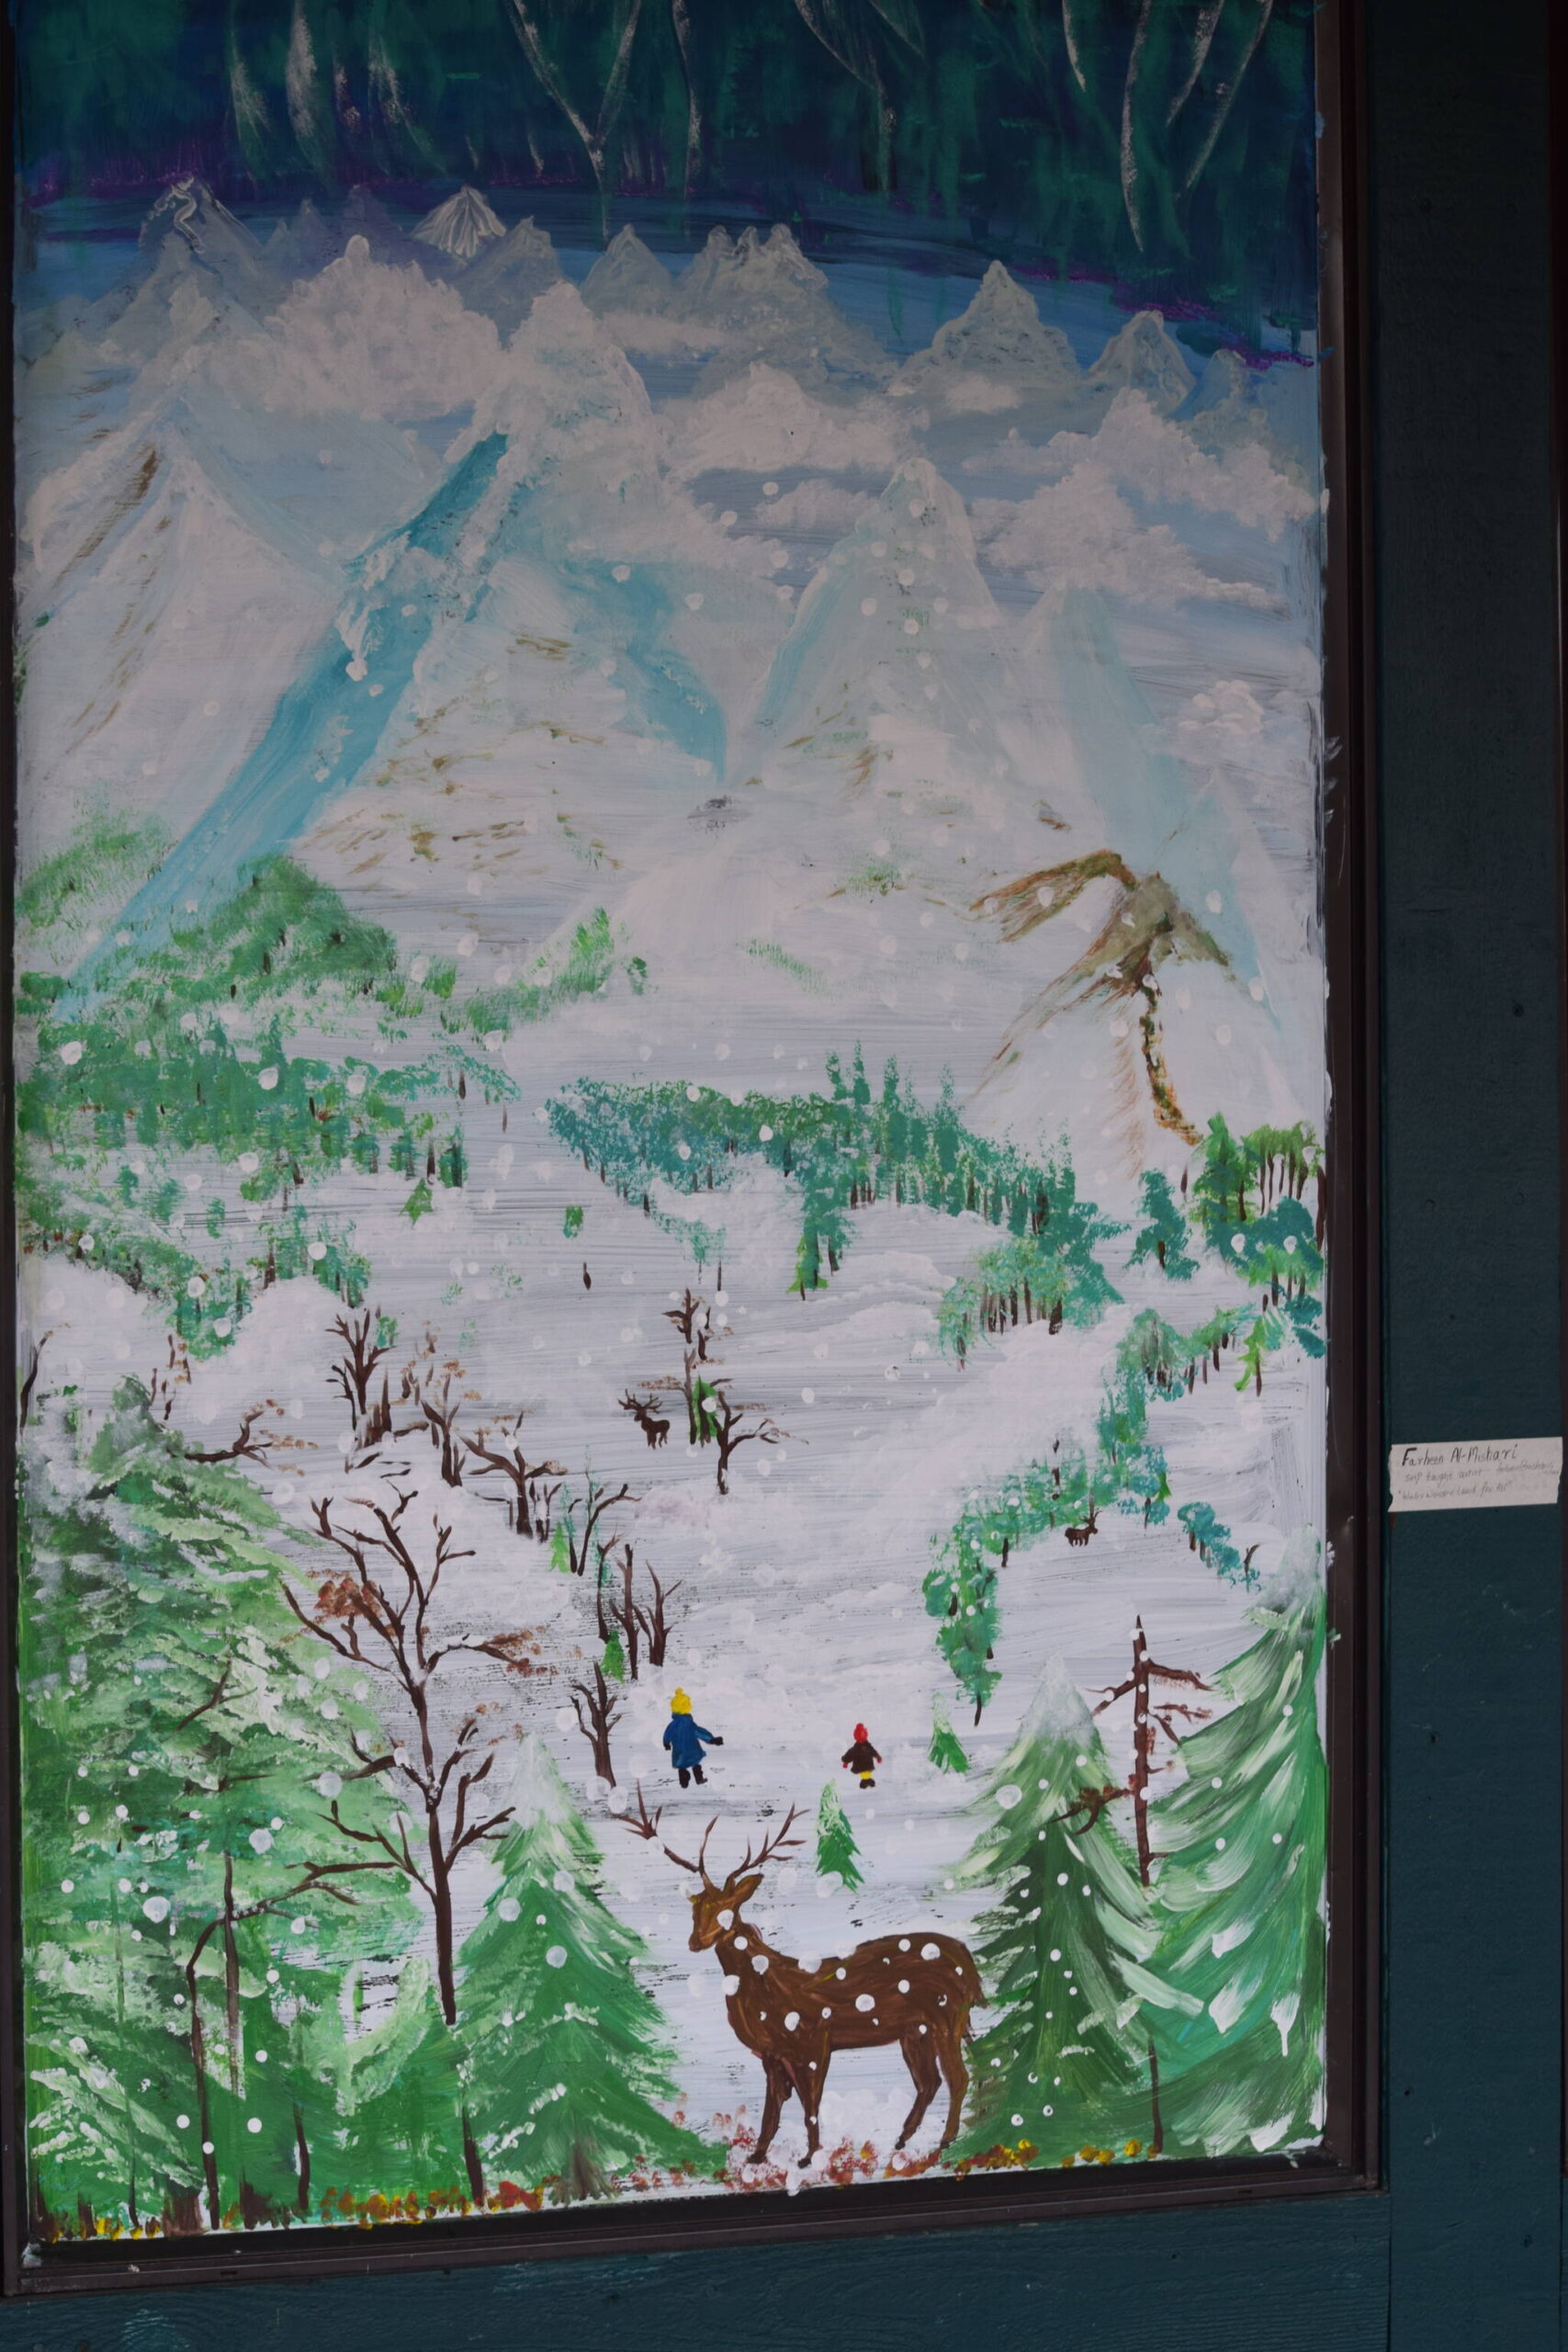 A “Winter Wonderland For All” painted by Farheen Al-Mishari.